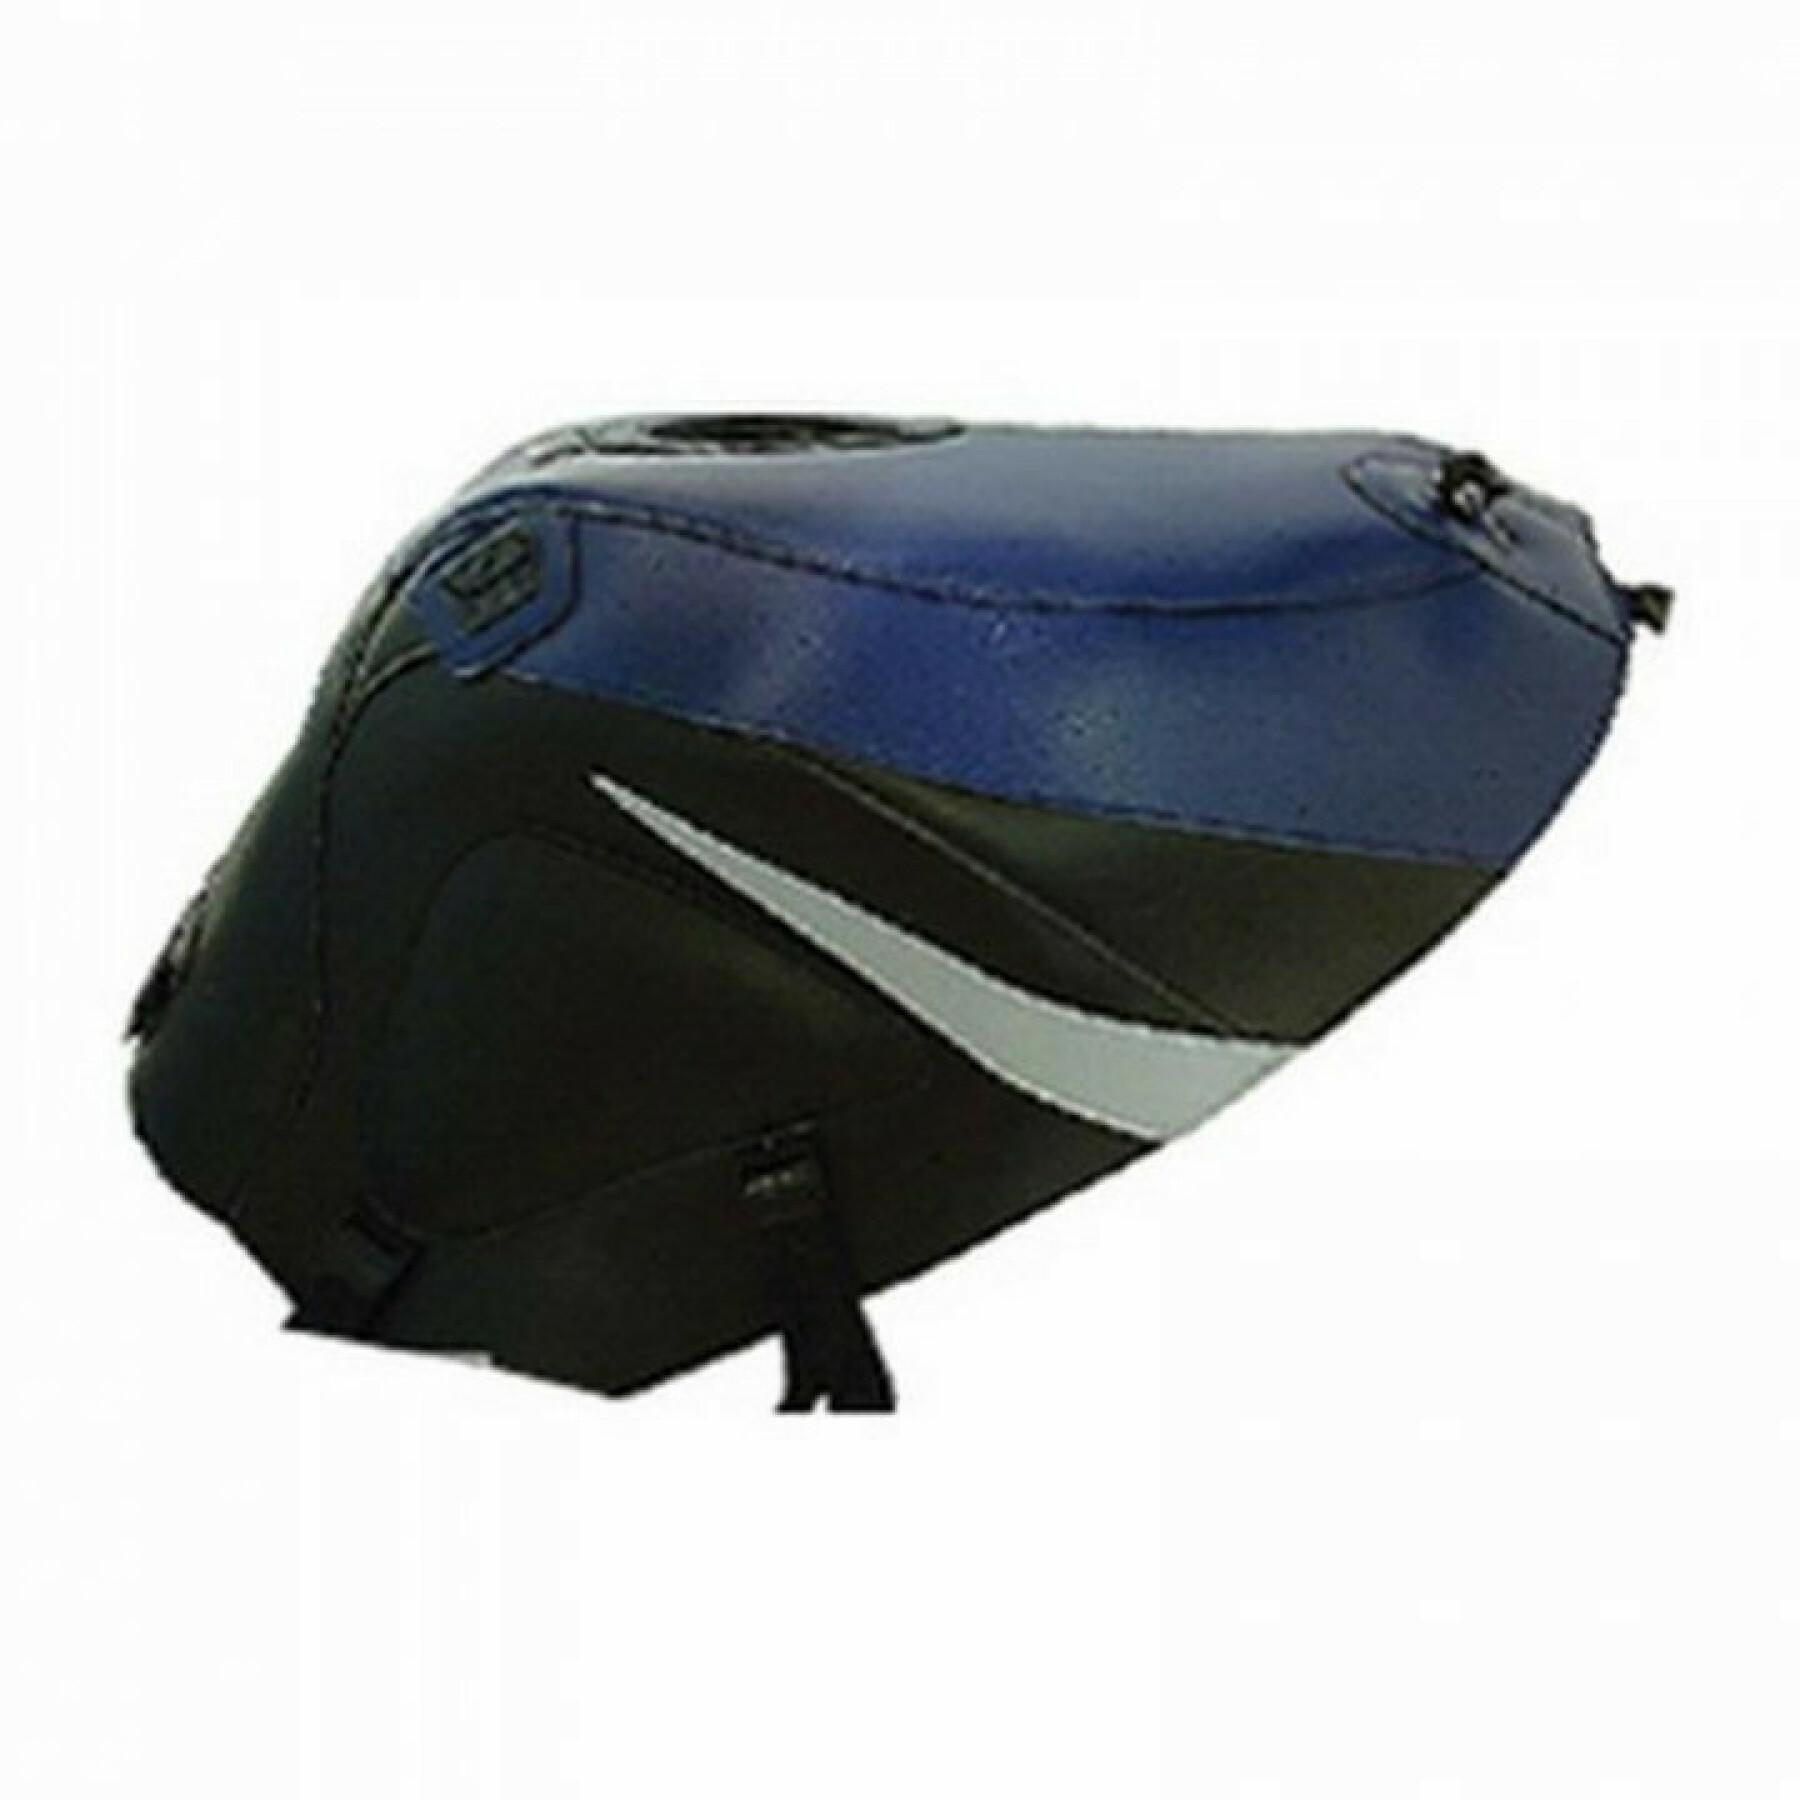 Motorcycle tank cover Bagster gsx 600/ gsx 750/ gsxs 1000 r